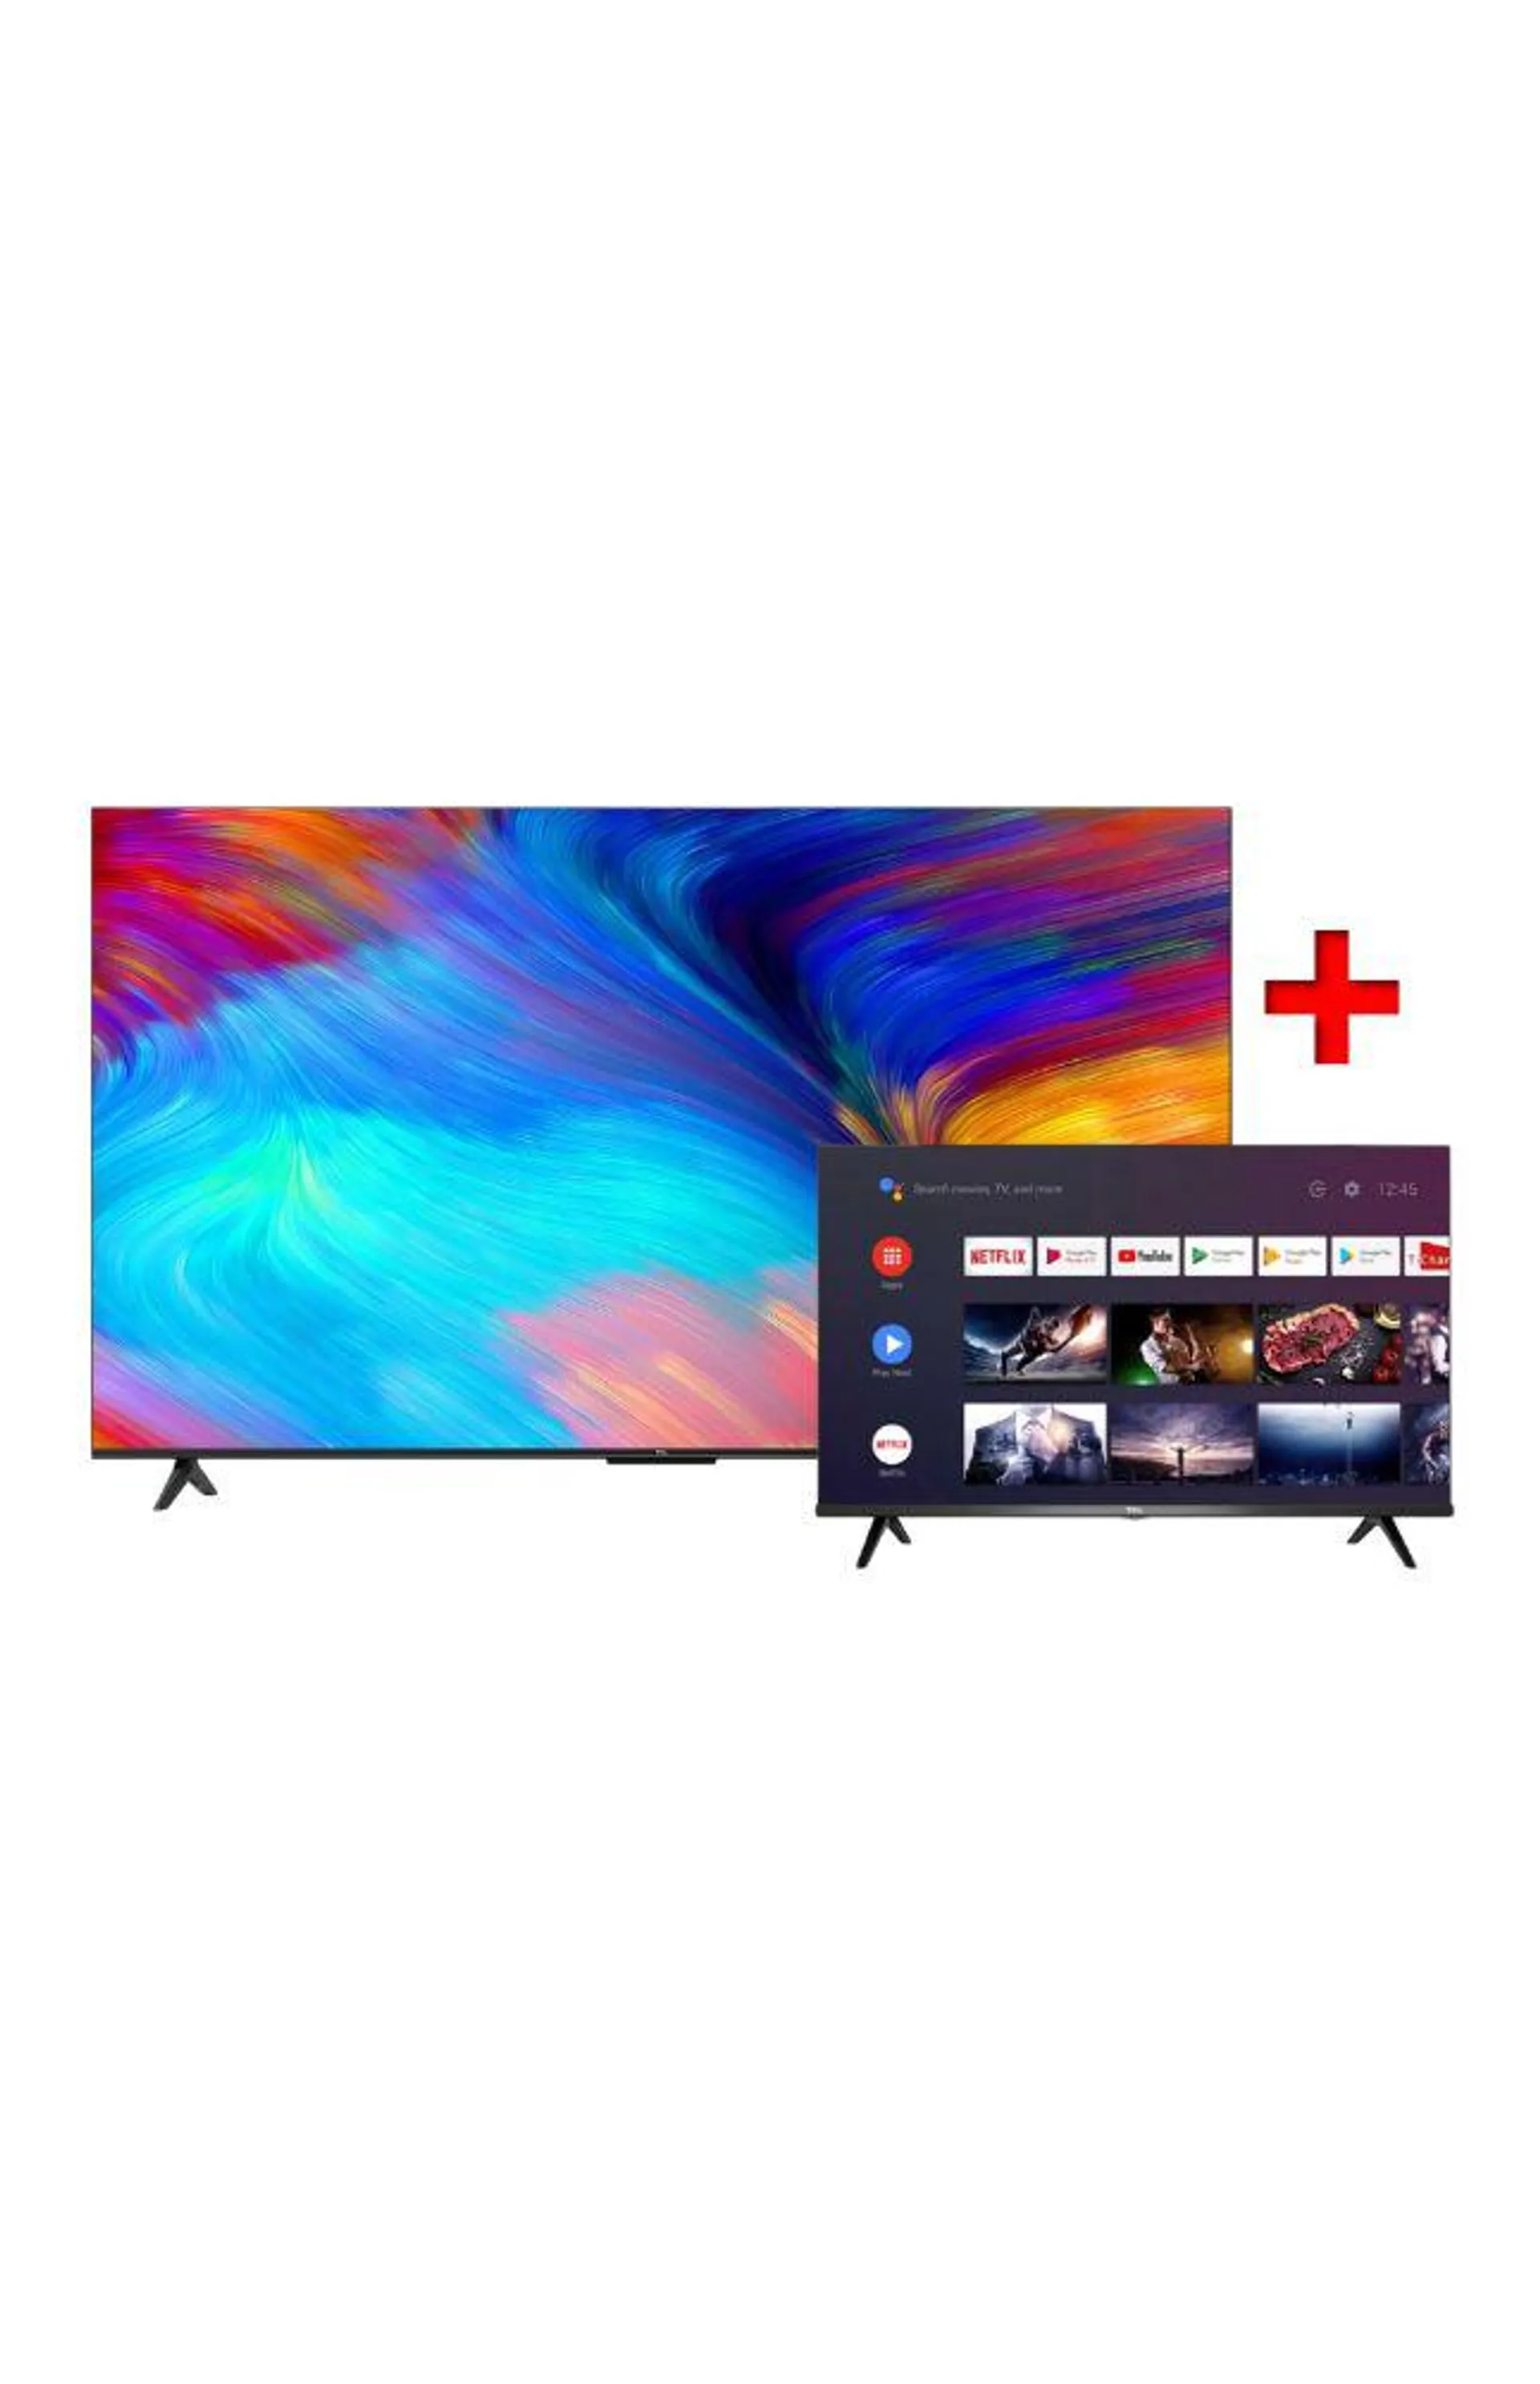 Combo TV TCL 50" 50P635 LED UHD Google TV + TCL 32" HD 2K Android 32S60A